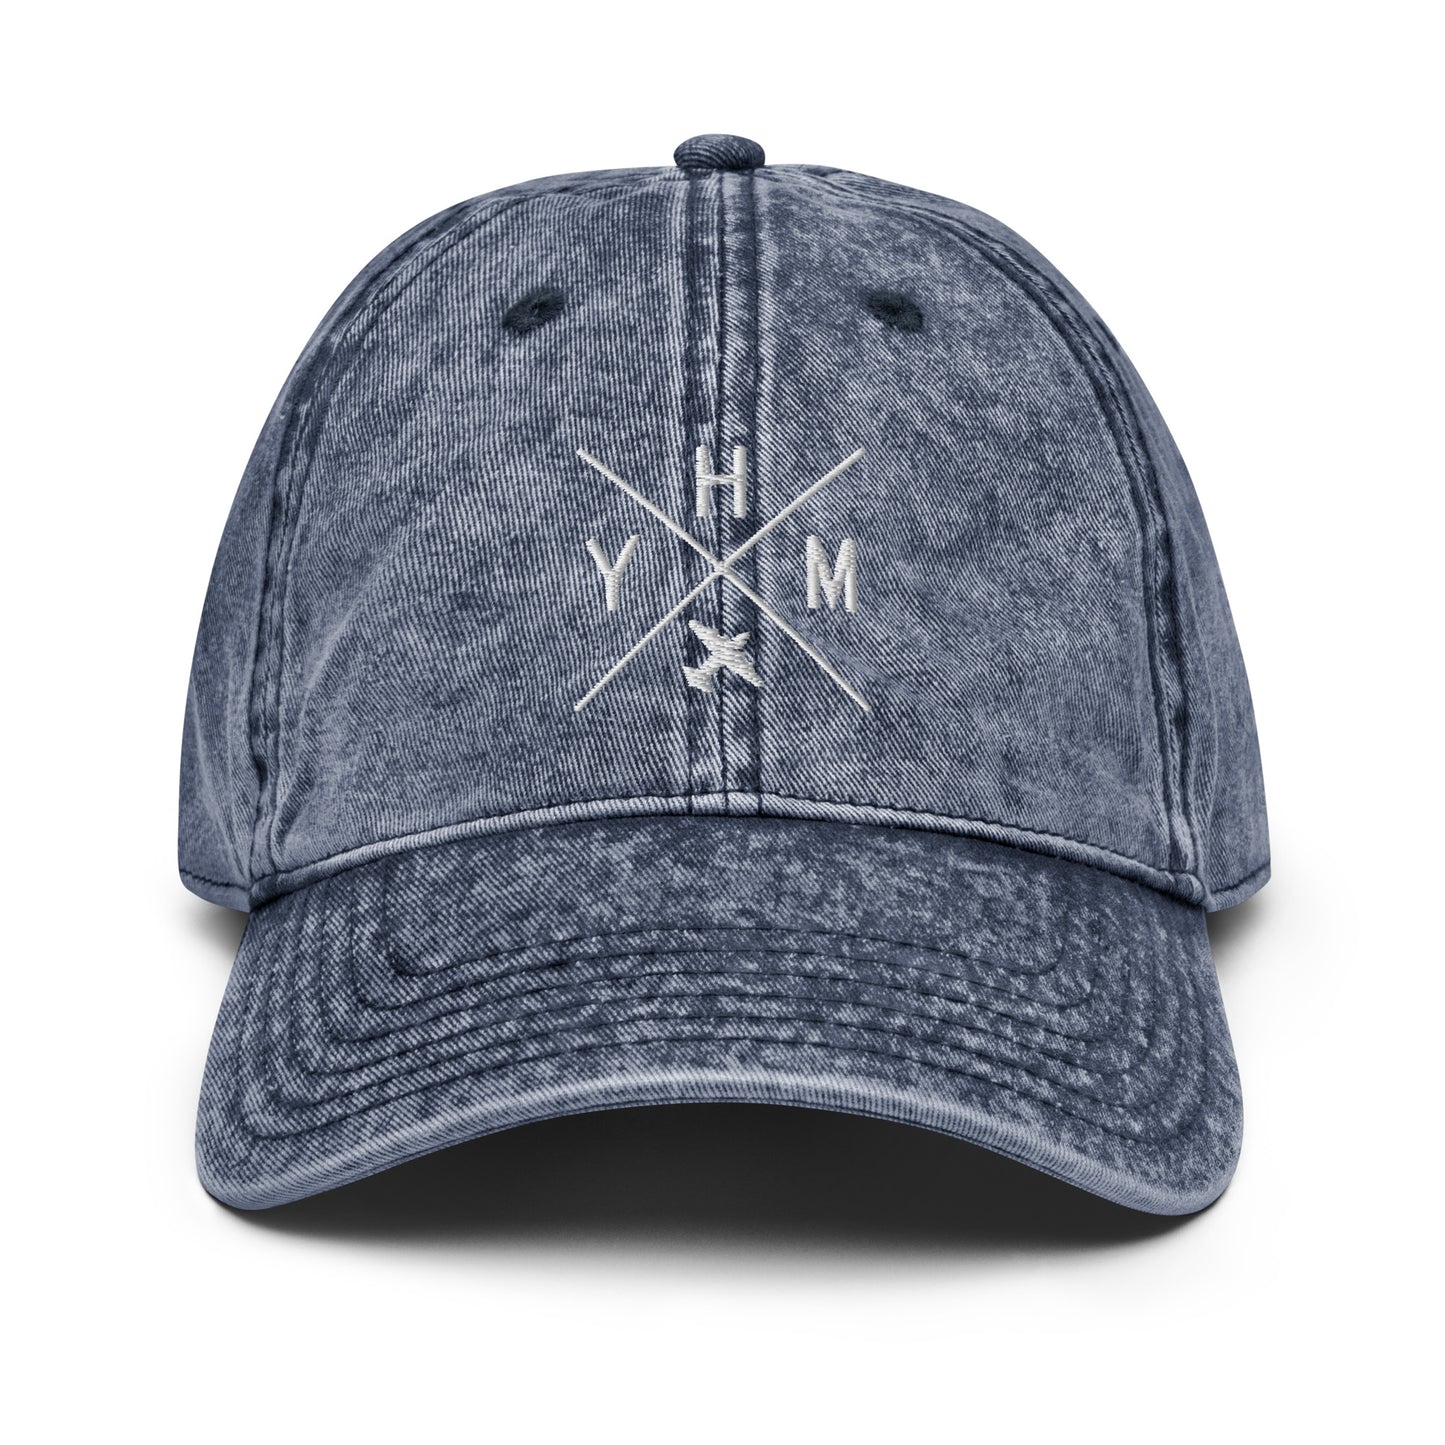 Crossed-X Vintage Cotton Twill Cap • White Embroidery